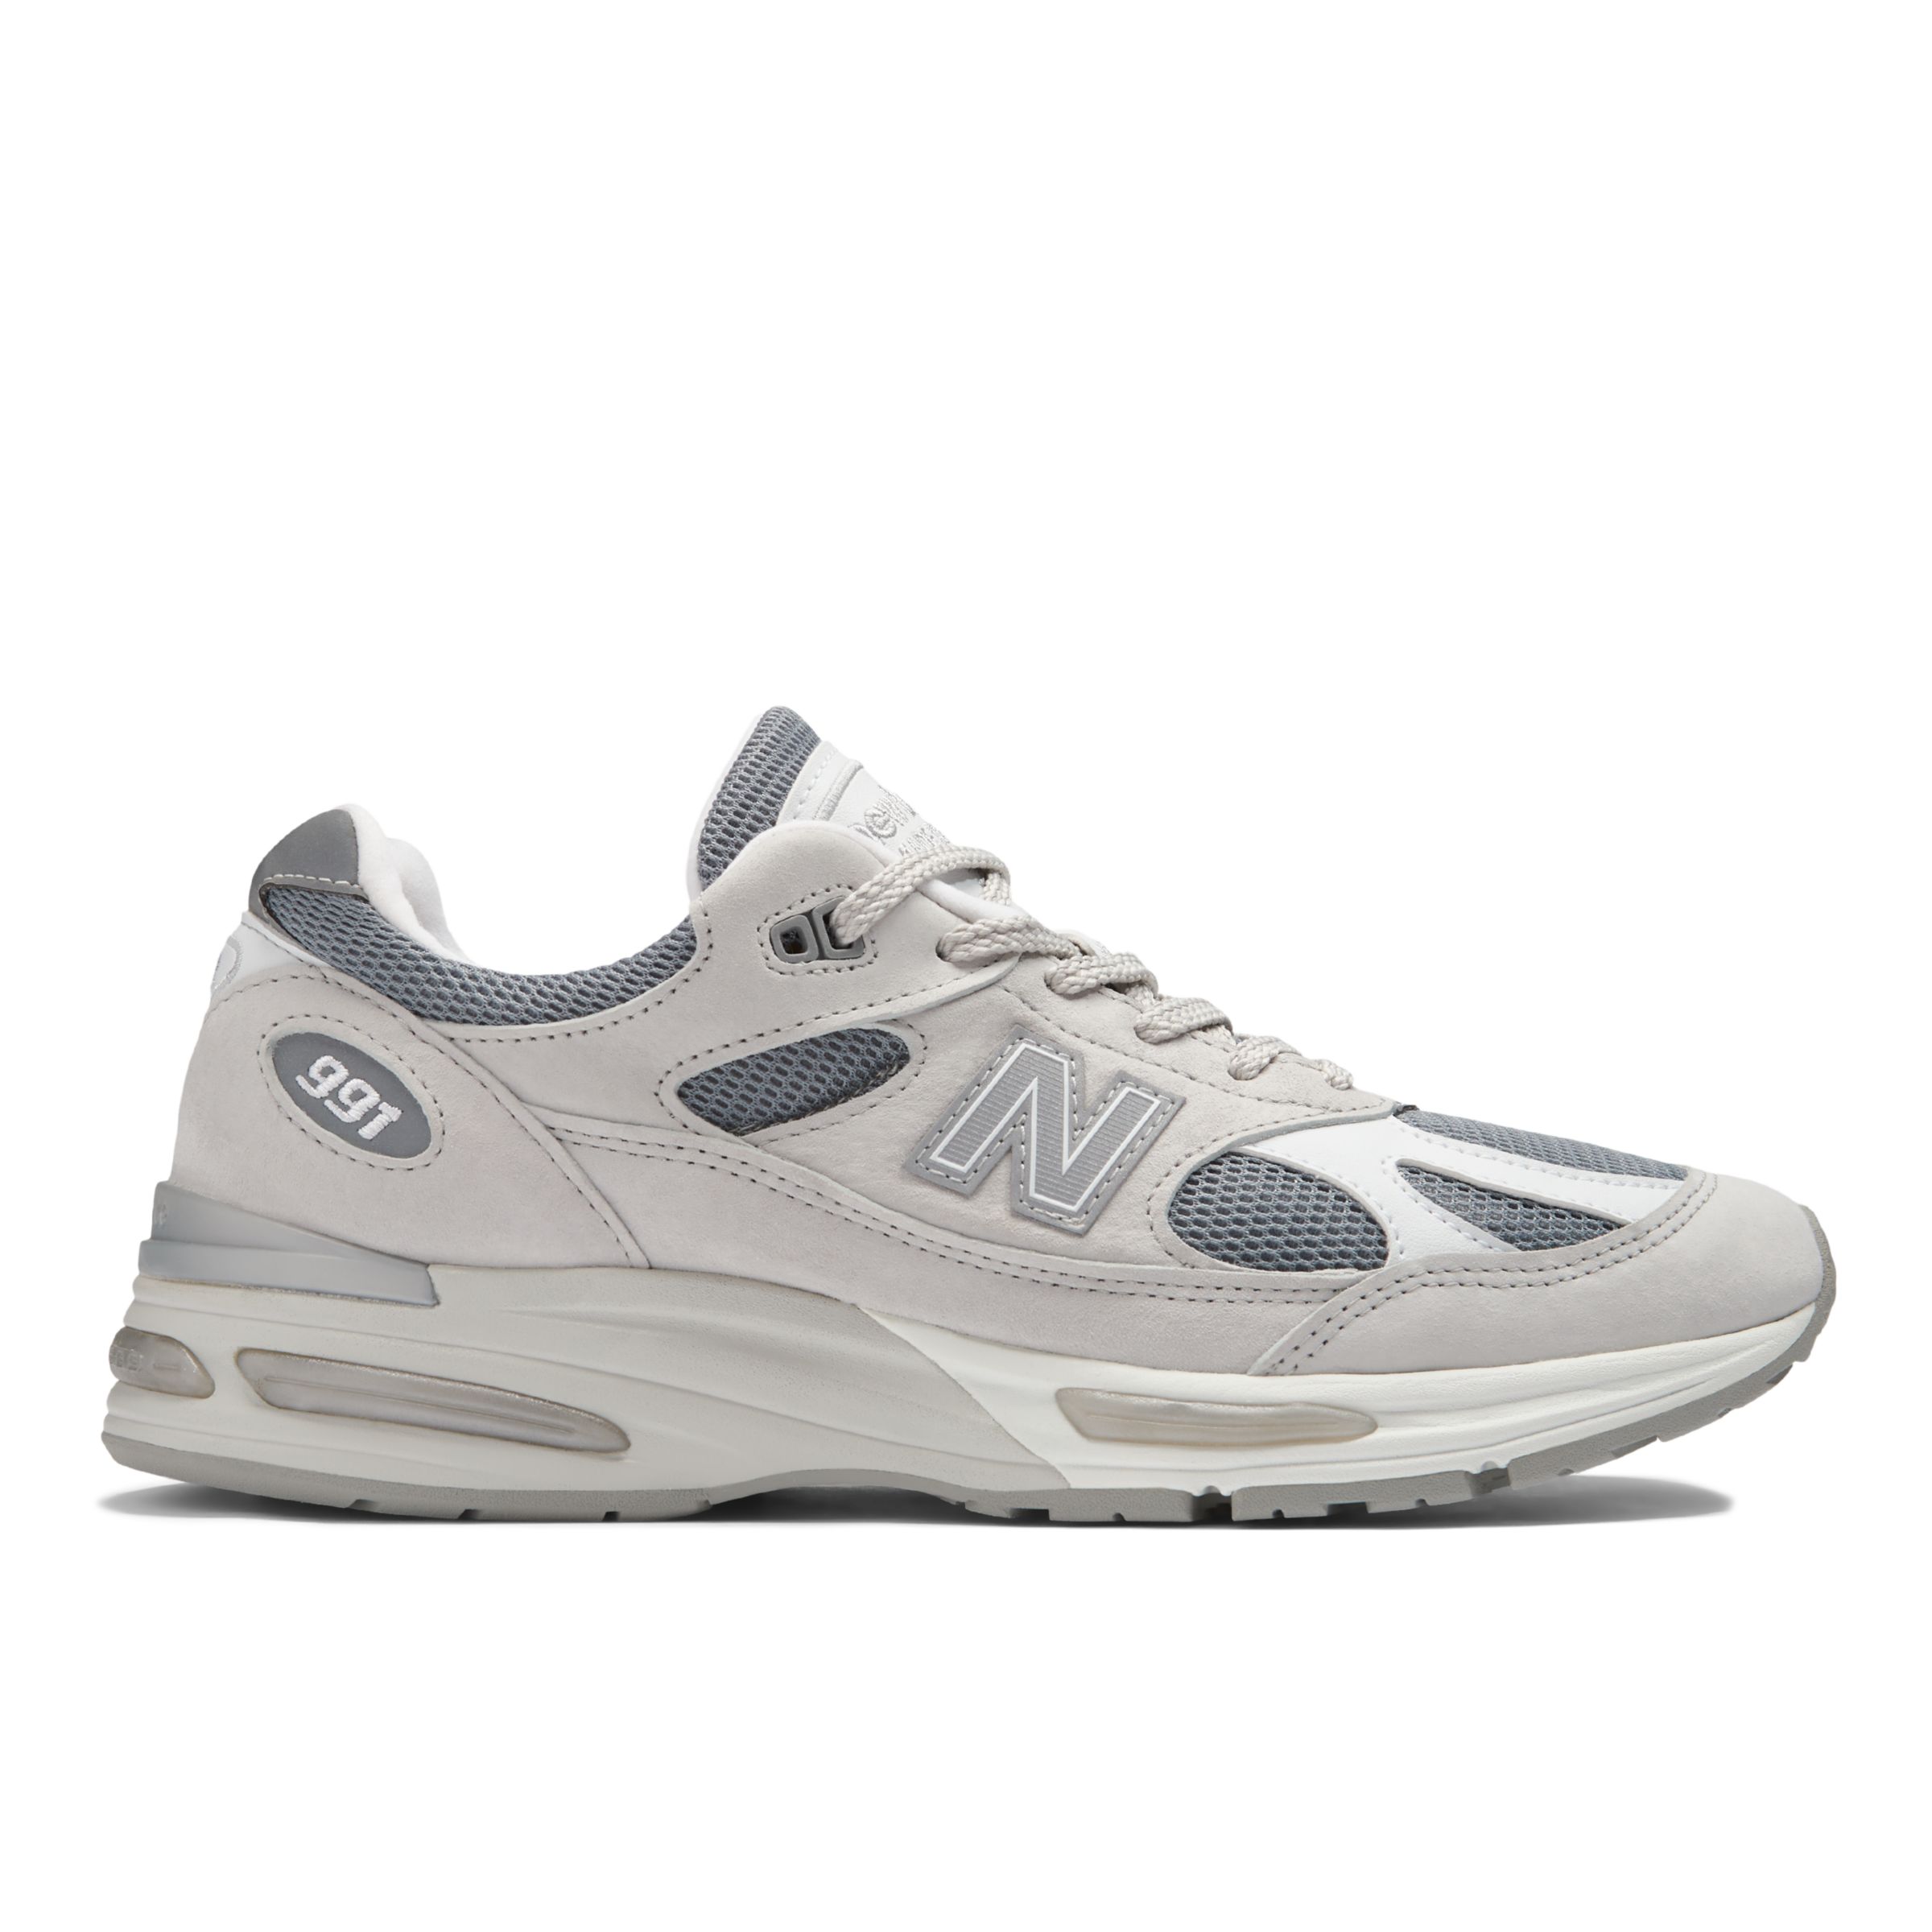 New Balance Unisexe MADE in UK 991v2 en Gris/Blanc, Suede/Mesh, Taille 40.5 Large